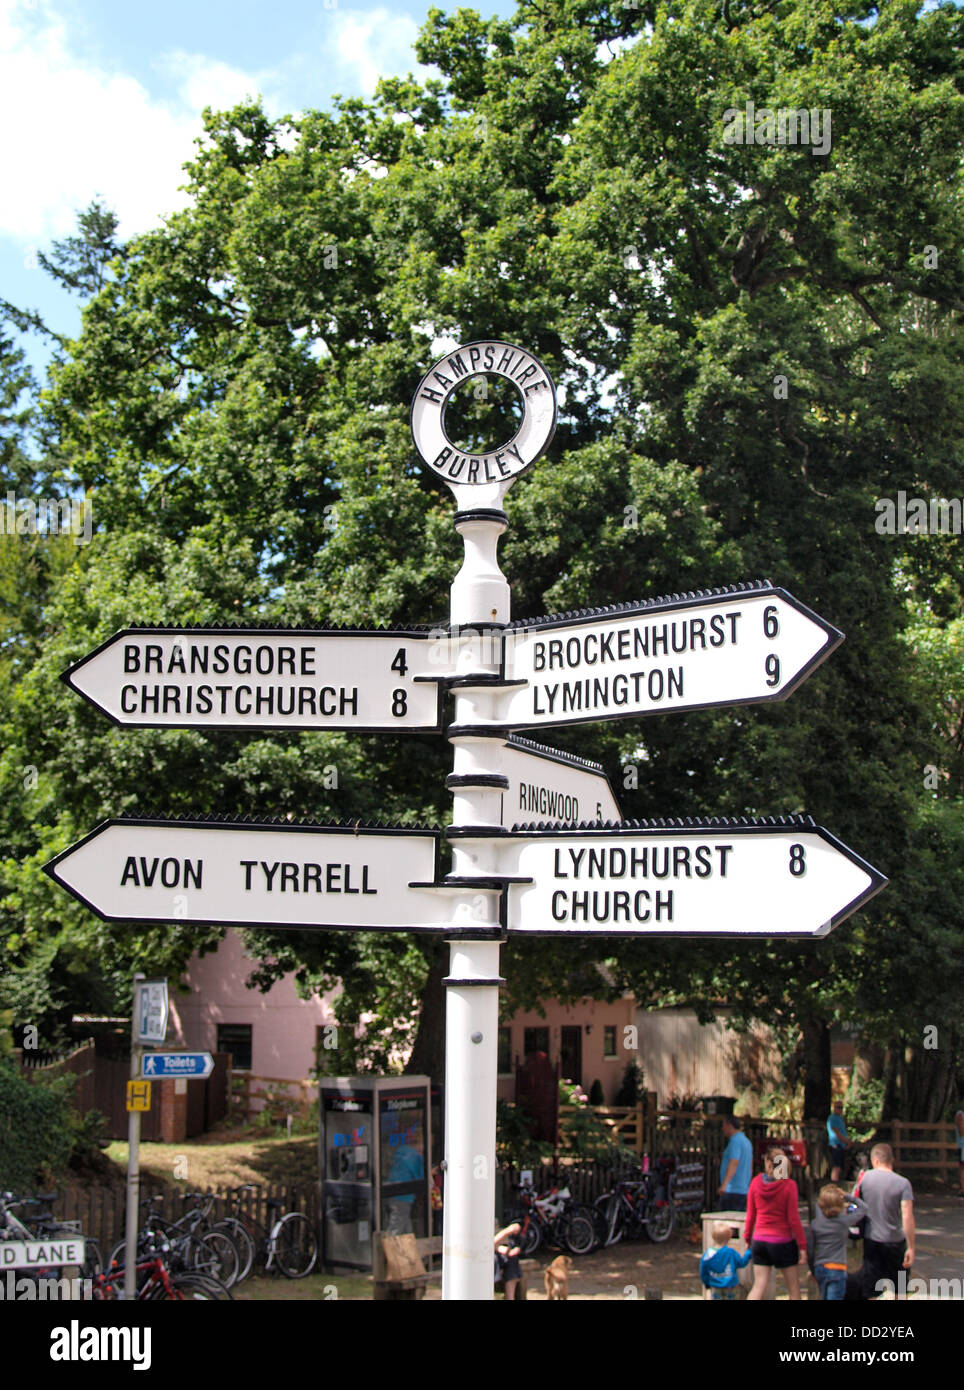 Signpost, Burley, New Forest, Hampshire, UK 2013 Banque D'Images